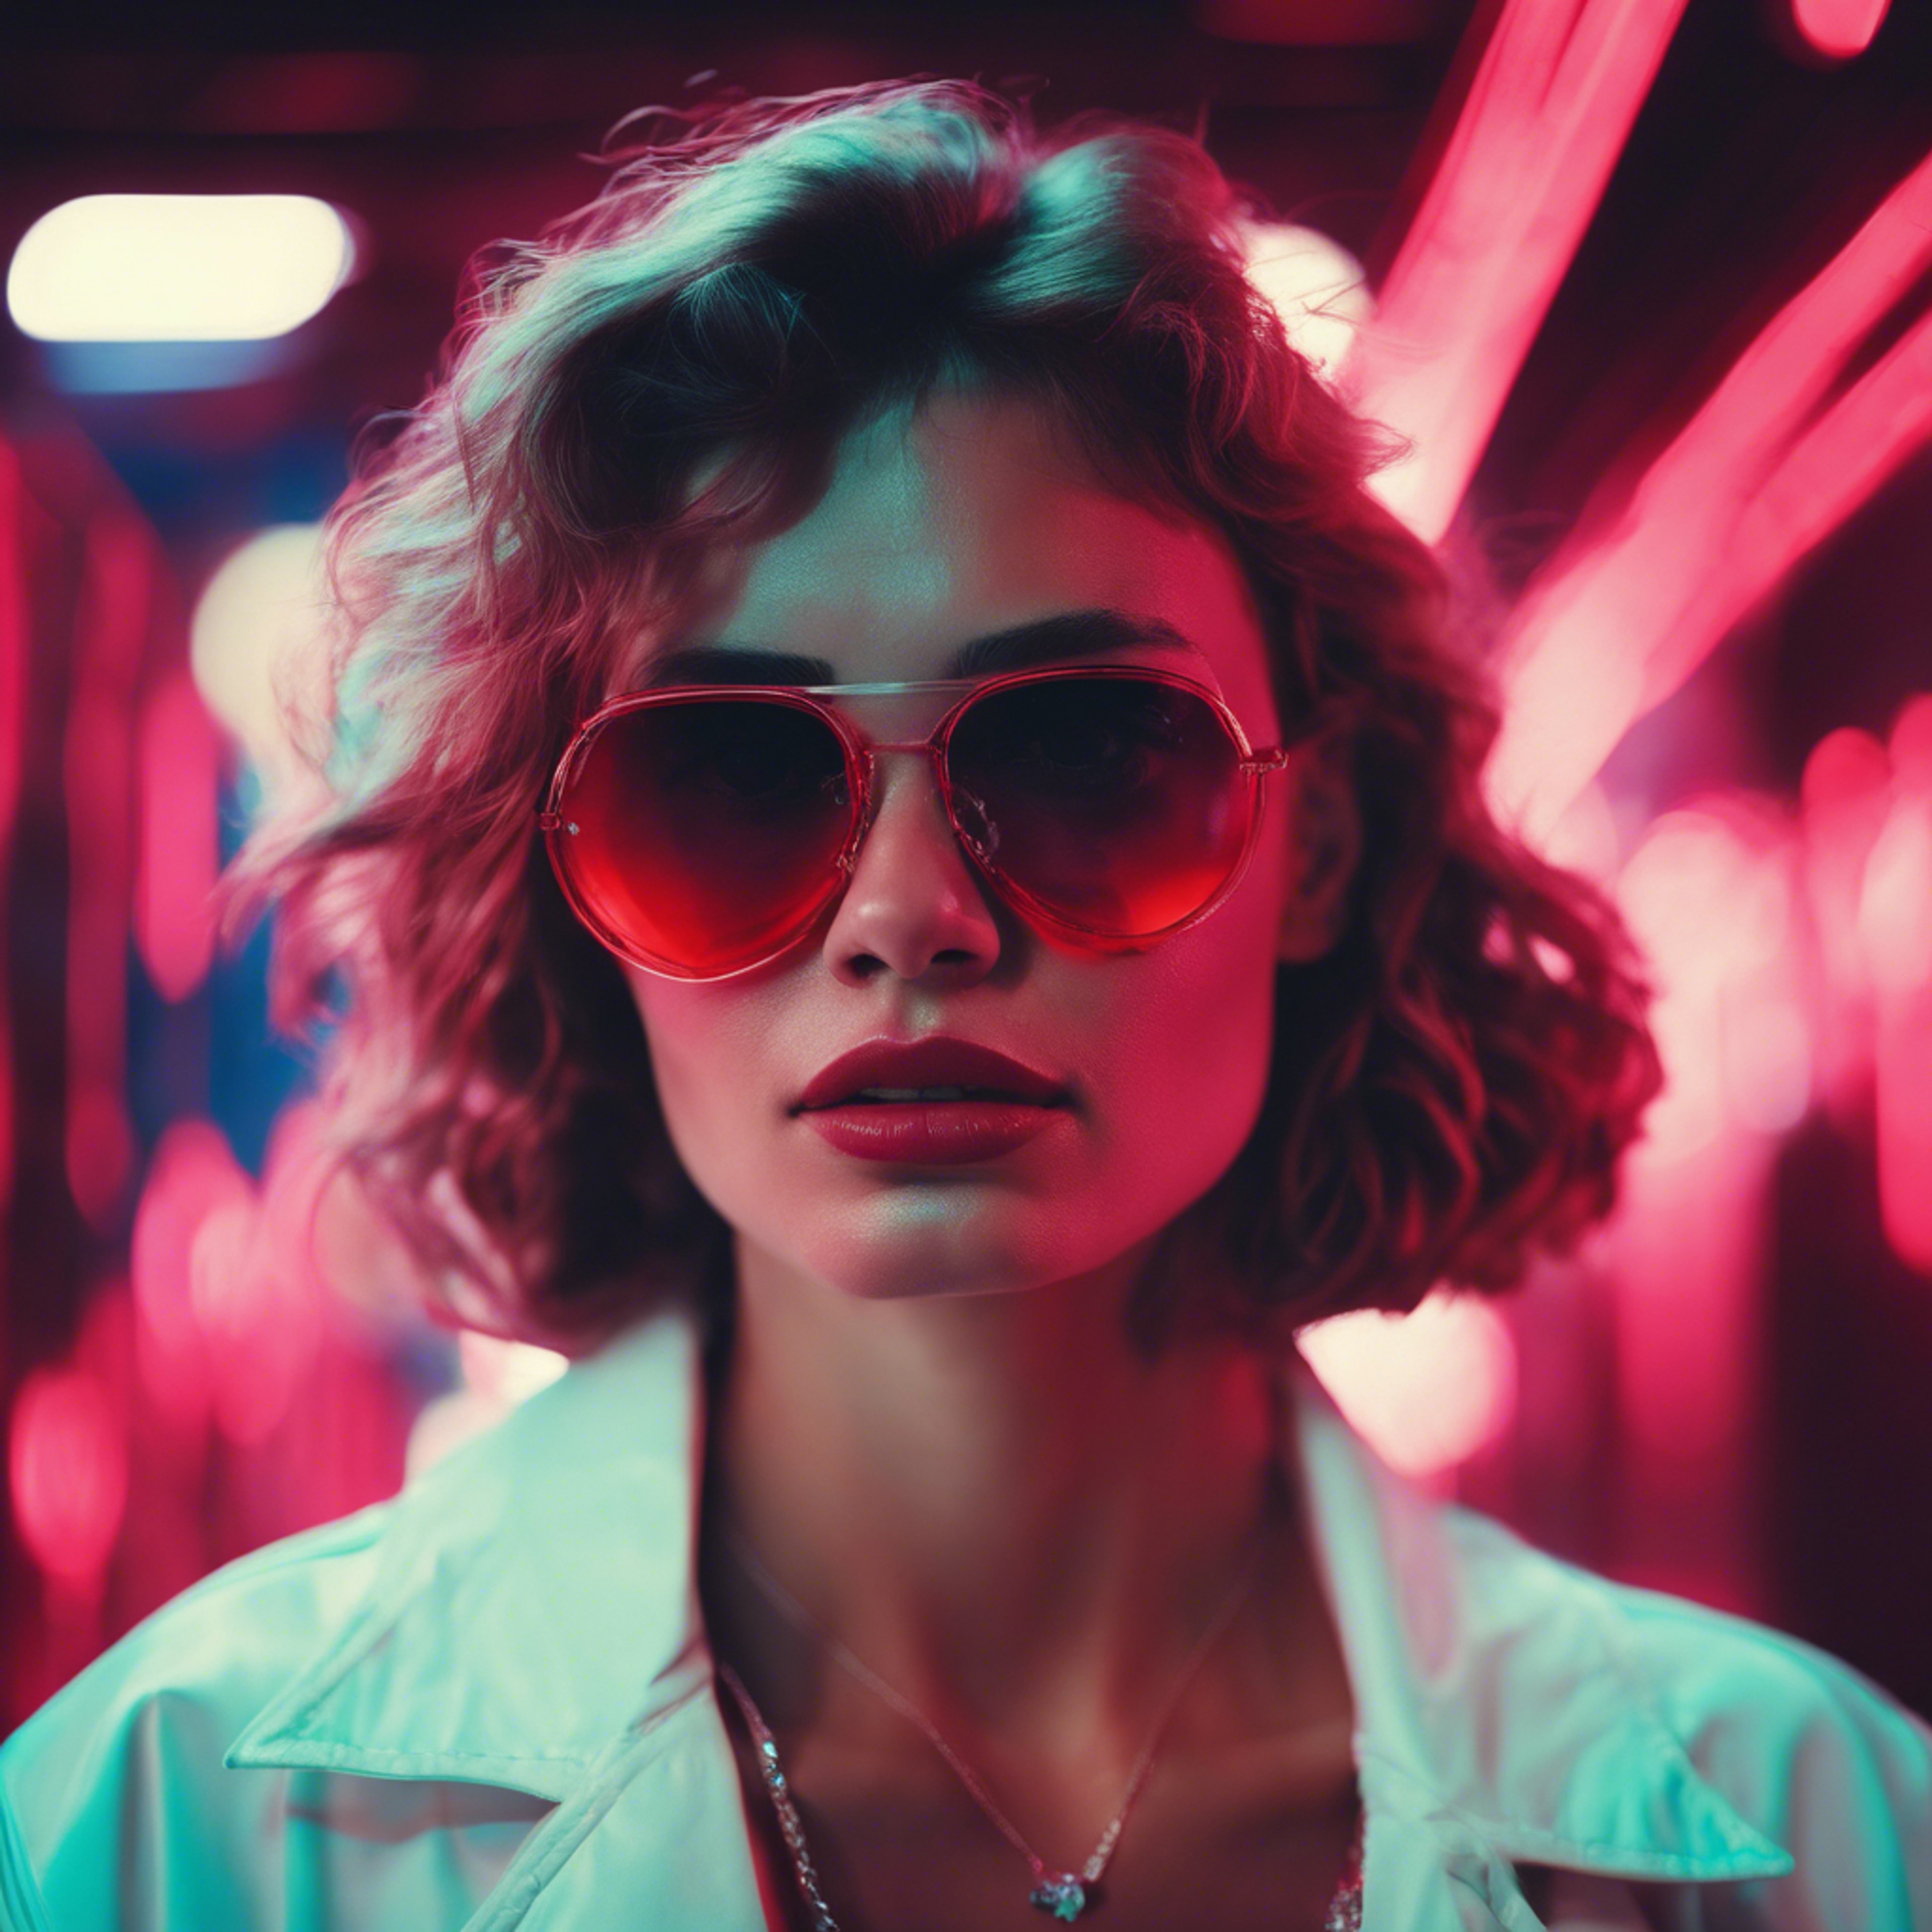 Retro 80's style portrait of a woman in sunglasses lit by cool red neon lights. 牆紙[9fb655559f07479e9c29]